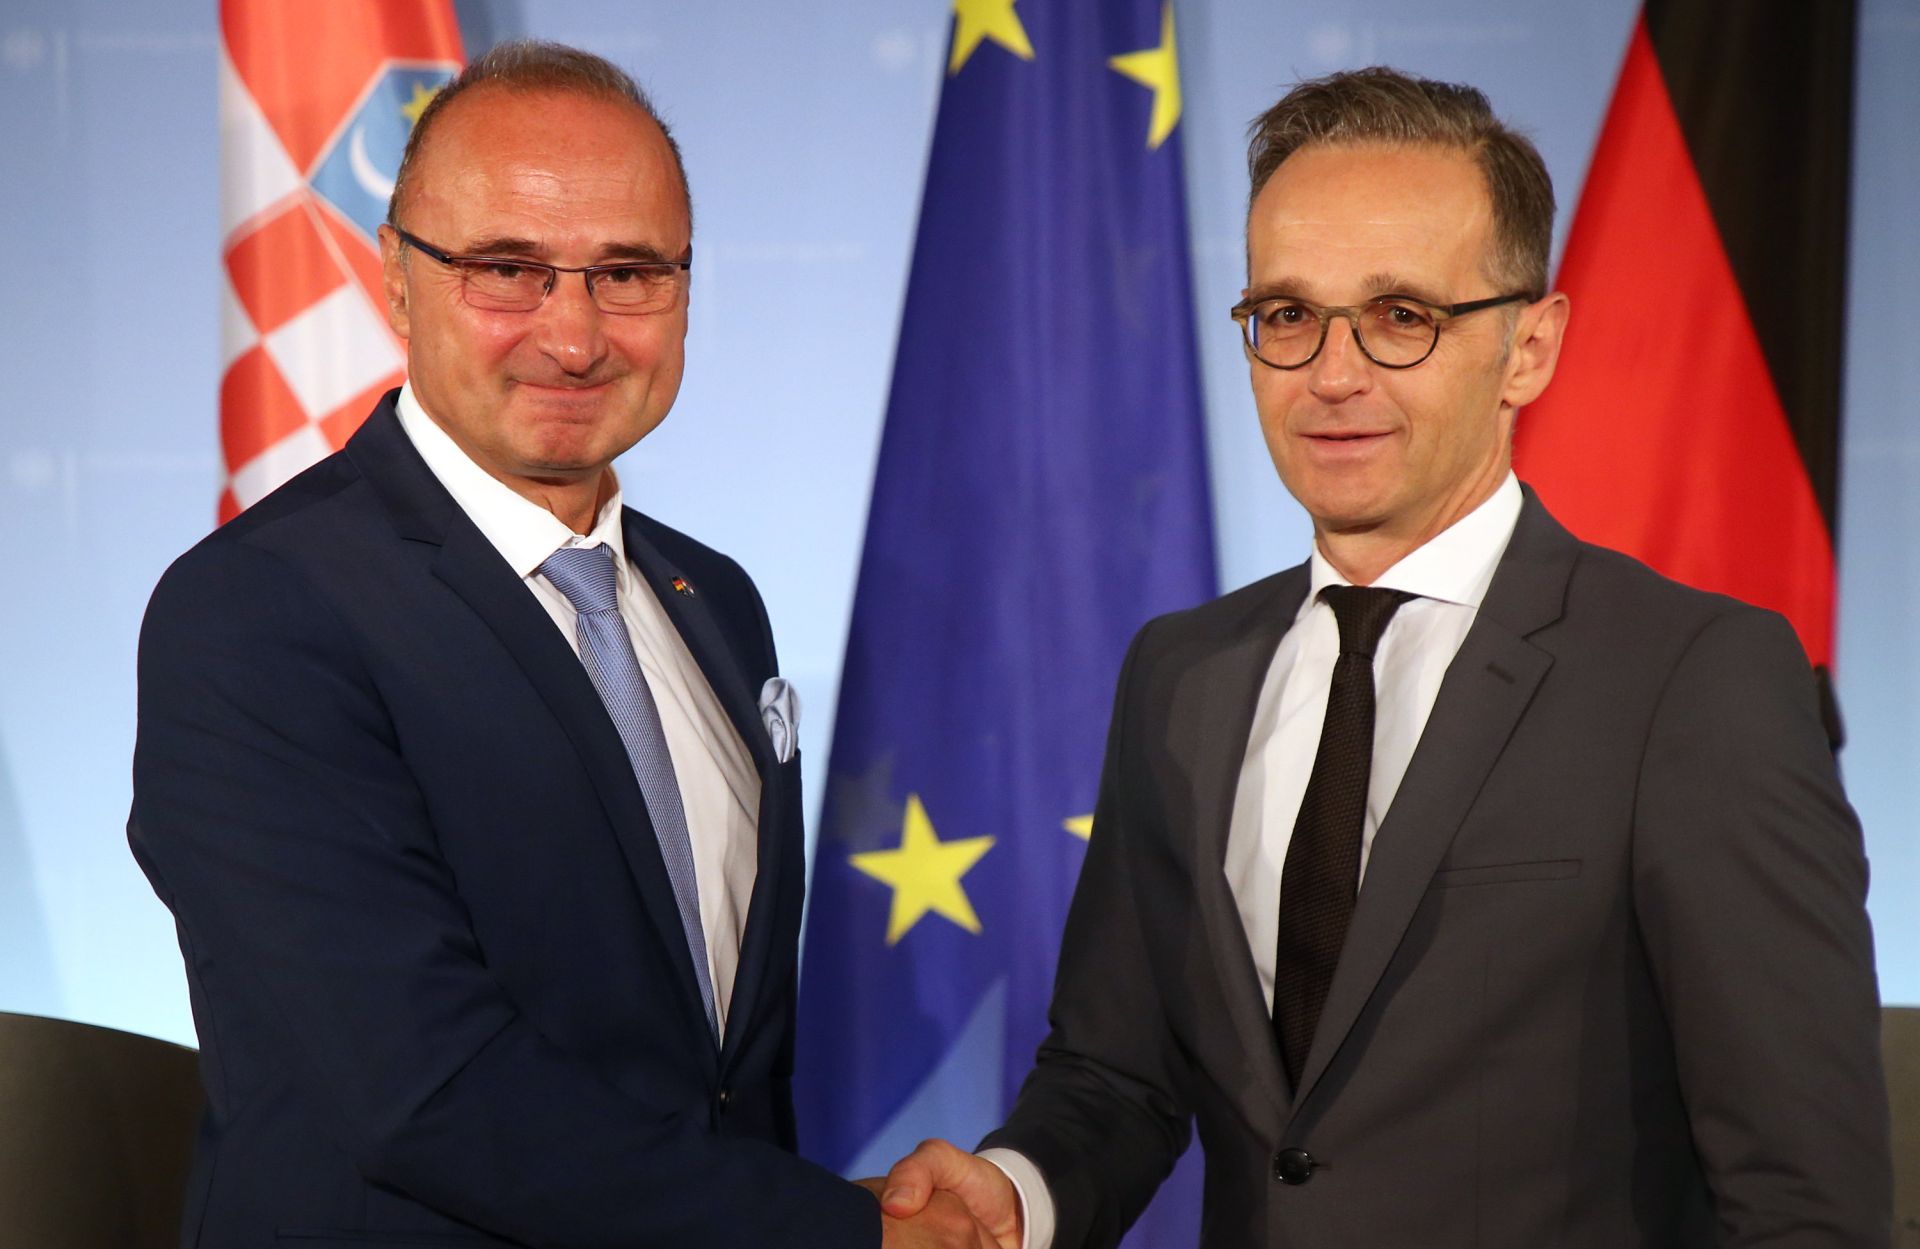 09 September 2019, Berlin: German Foreign Minister Heiko Maas (R) shakes hands with his Croatian counterpart Gordan Grlic Radman during a press conference at the Federal Foreign Office. Photo: Wolfgang Kumm/dpa